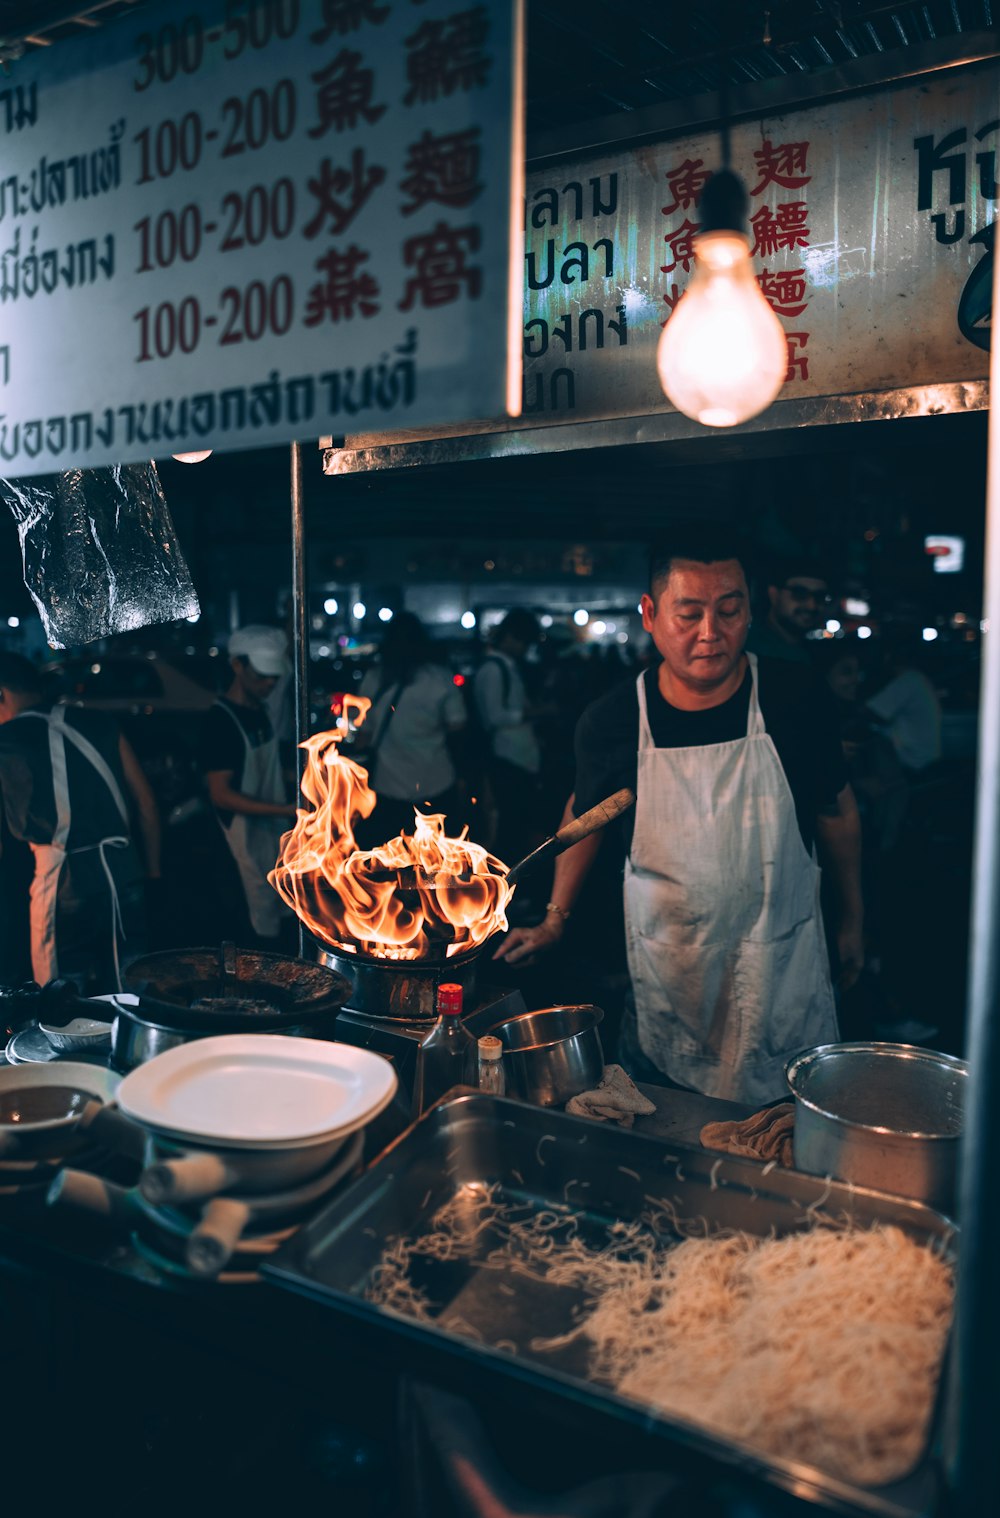 man cooking front of food stall